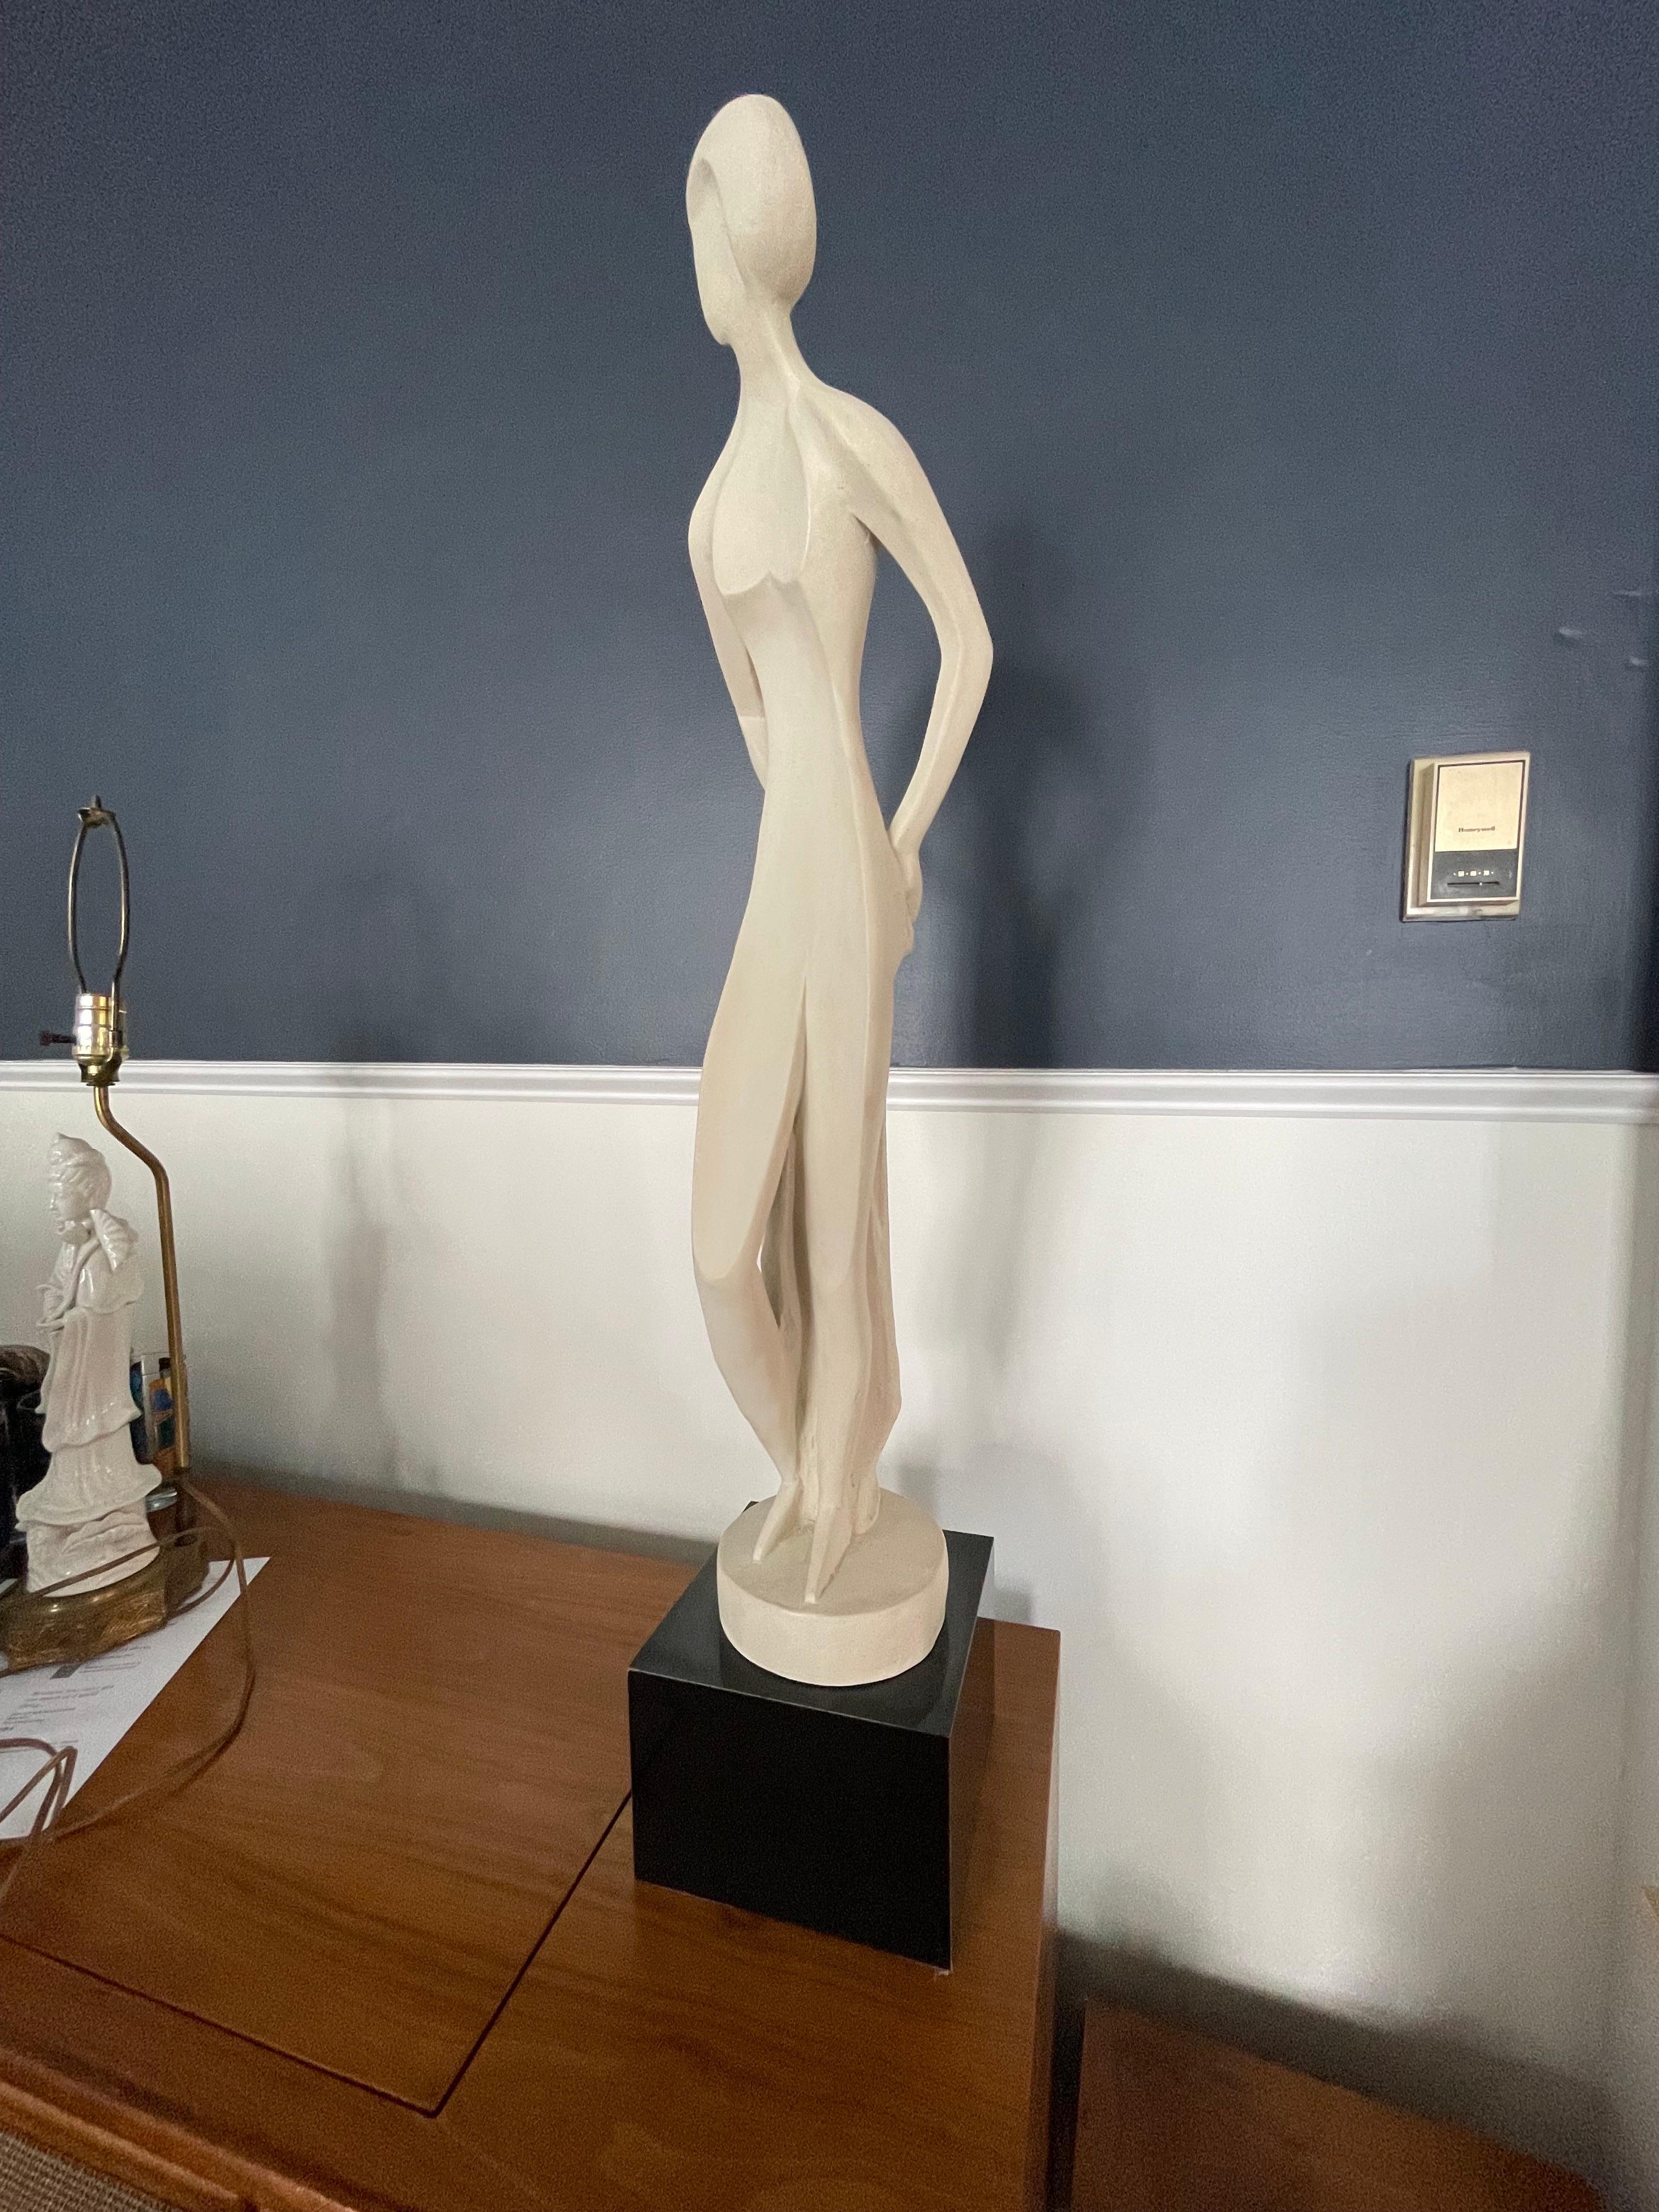 Sleek, glamorous, and graceful Nude by David Fisher for Austin Productions, 1981. Beautiful detail in this postmodern icon. Stand on black plinth base. Free of damage. Signed and dated. About as fine an example as you can find.
Curbside to